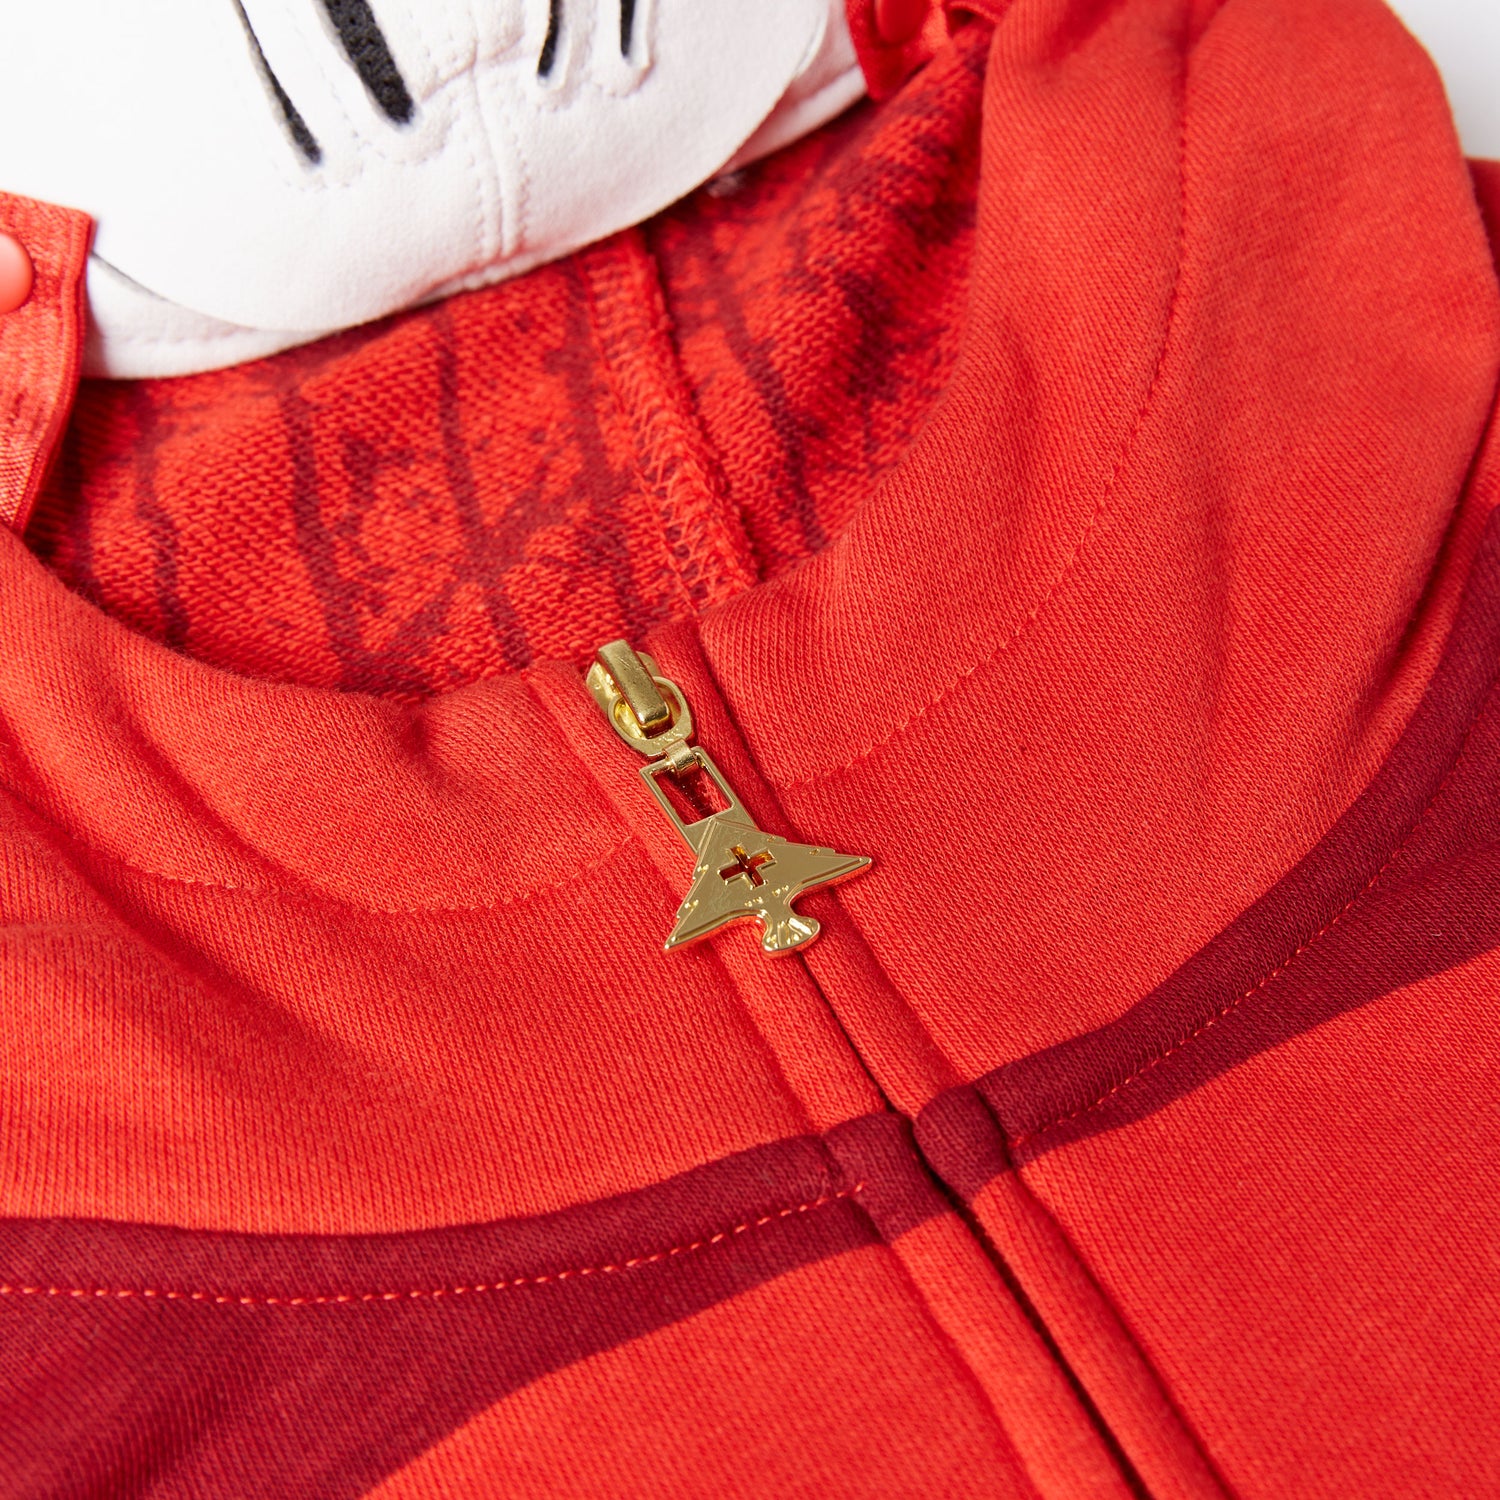 FRIDAY THE 47TH ZIP HOODIE - RED